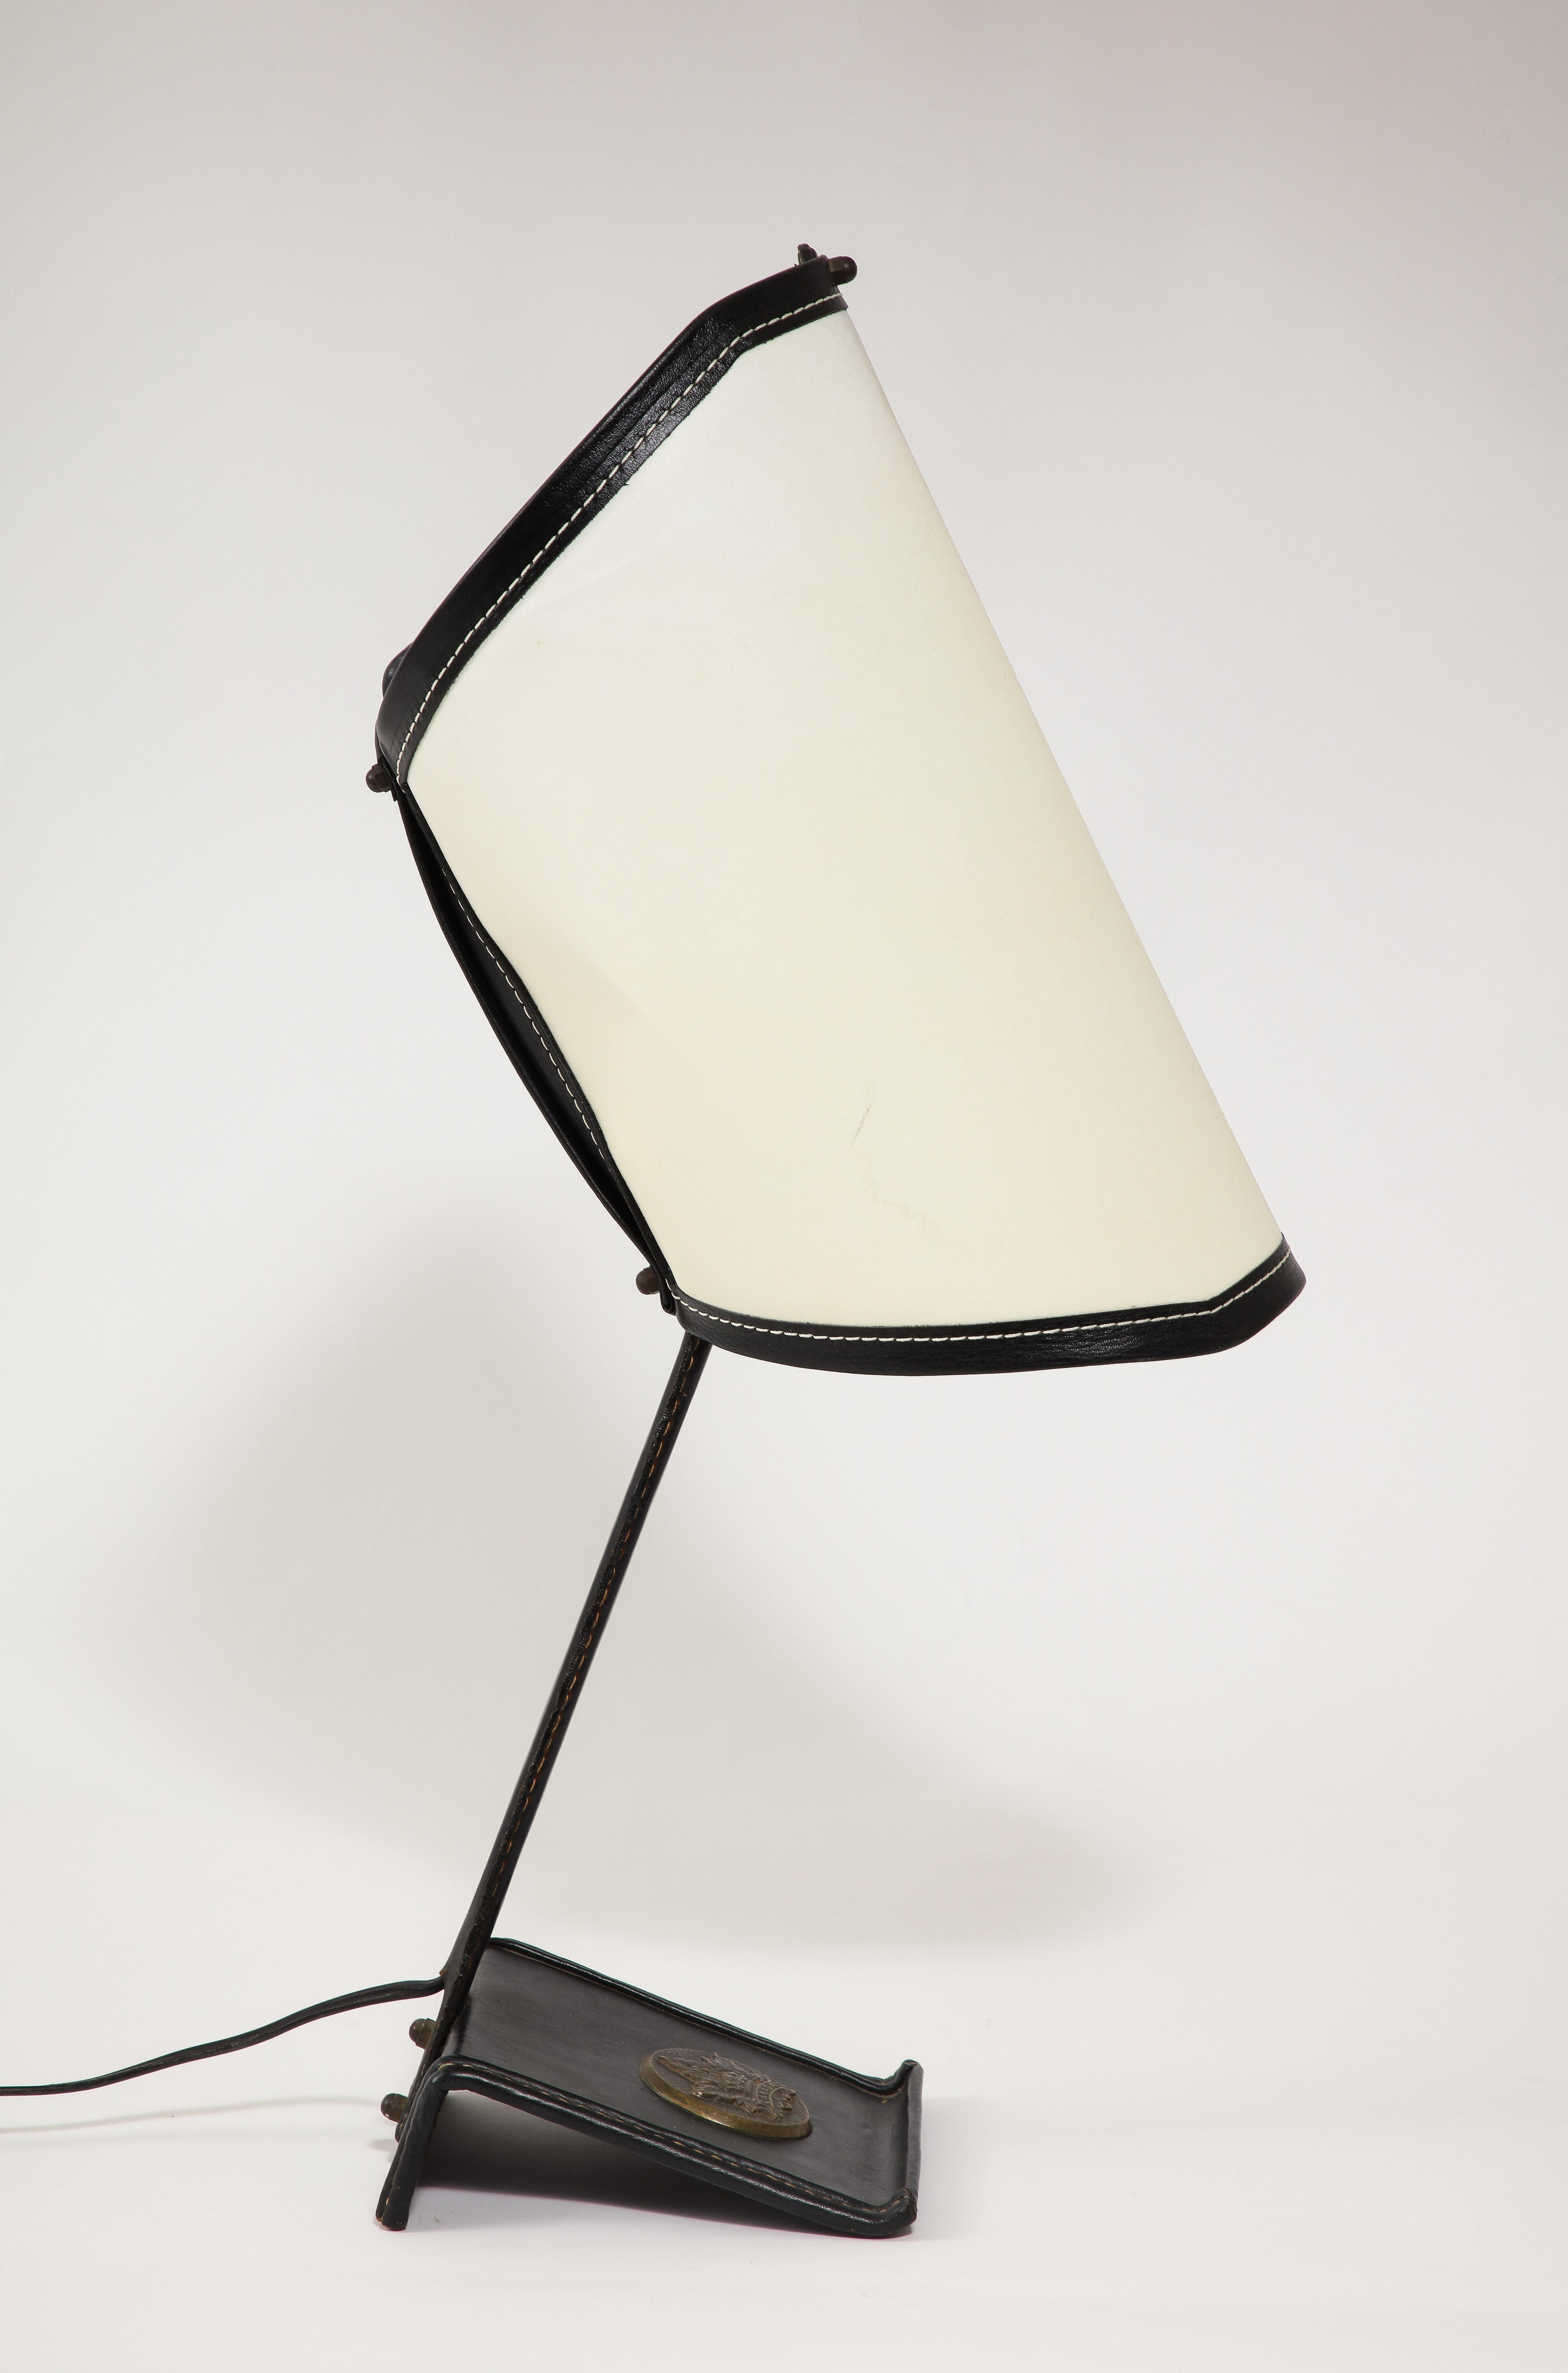 Jacques Adnet Curved Desk Lamp With Black Leather Trim, France 1950's For Sale 6